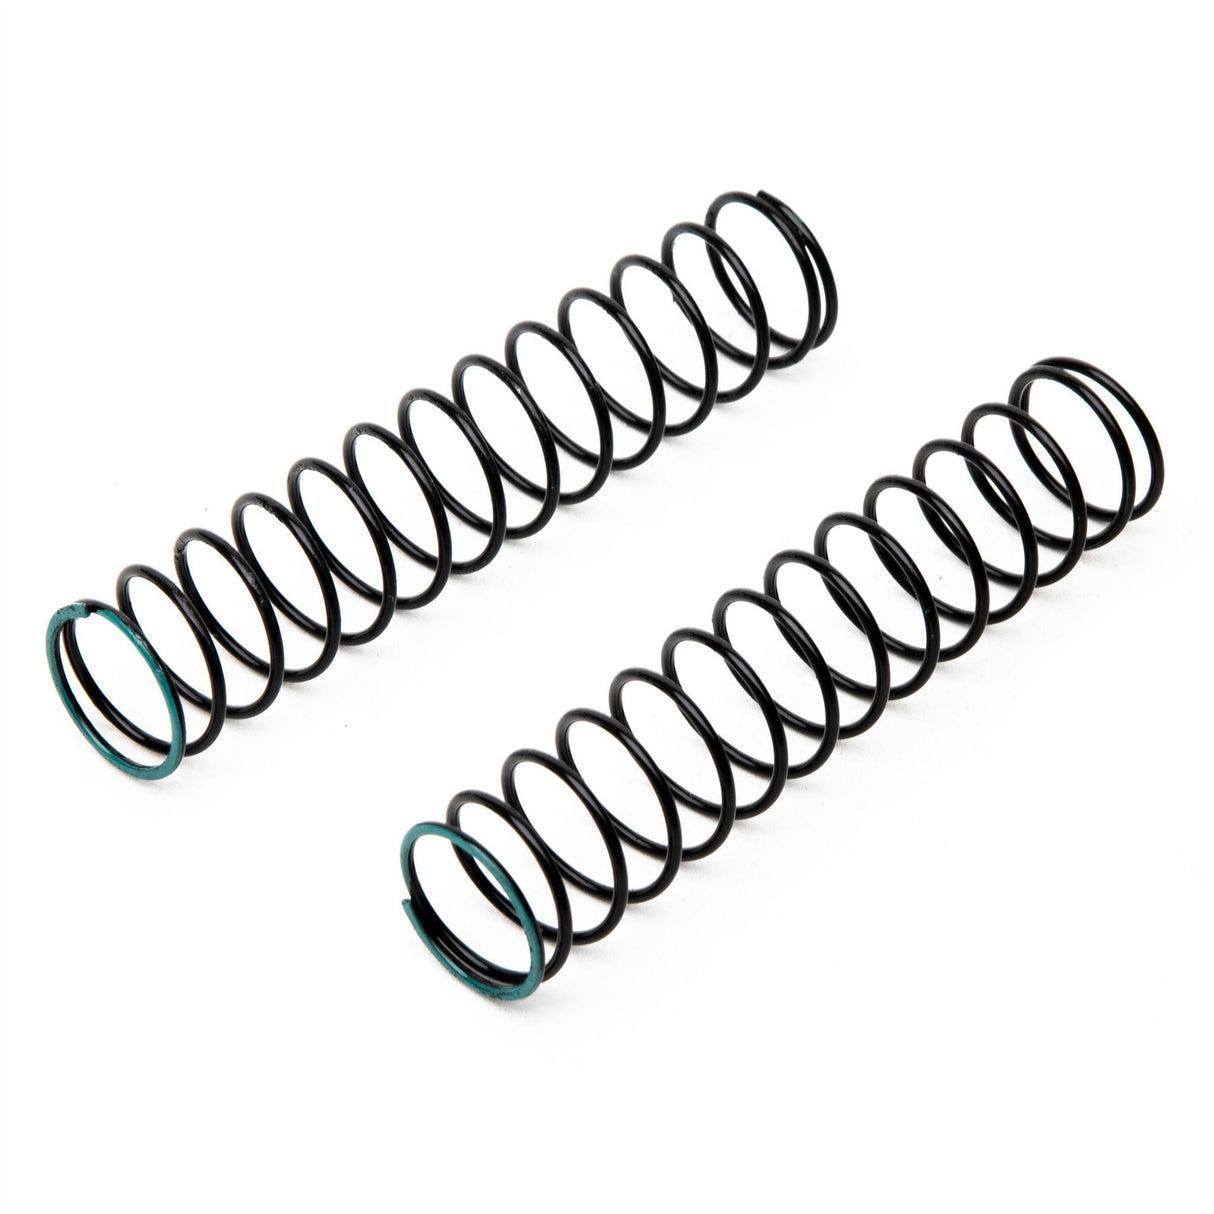 Axial Spring 15x85mm 2.50lbs in Green (2)